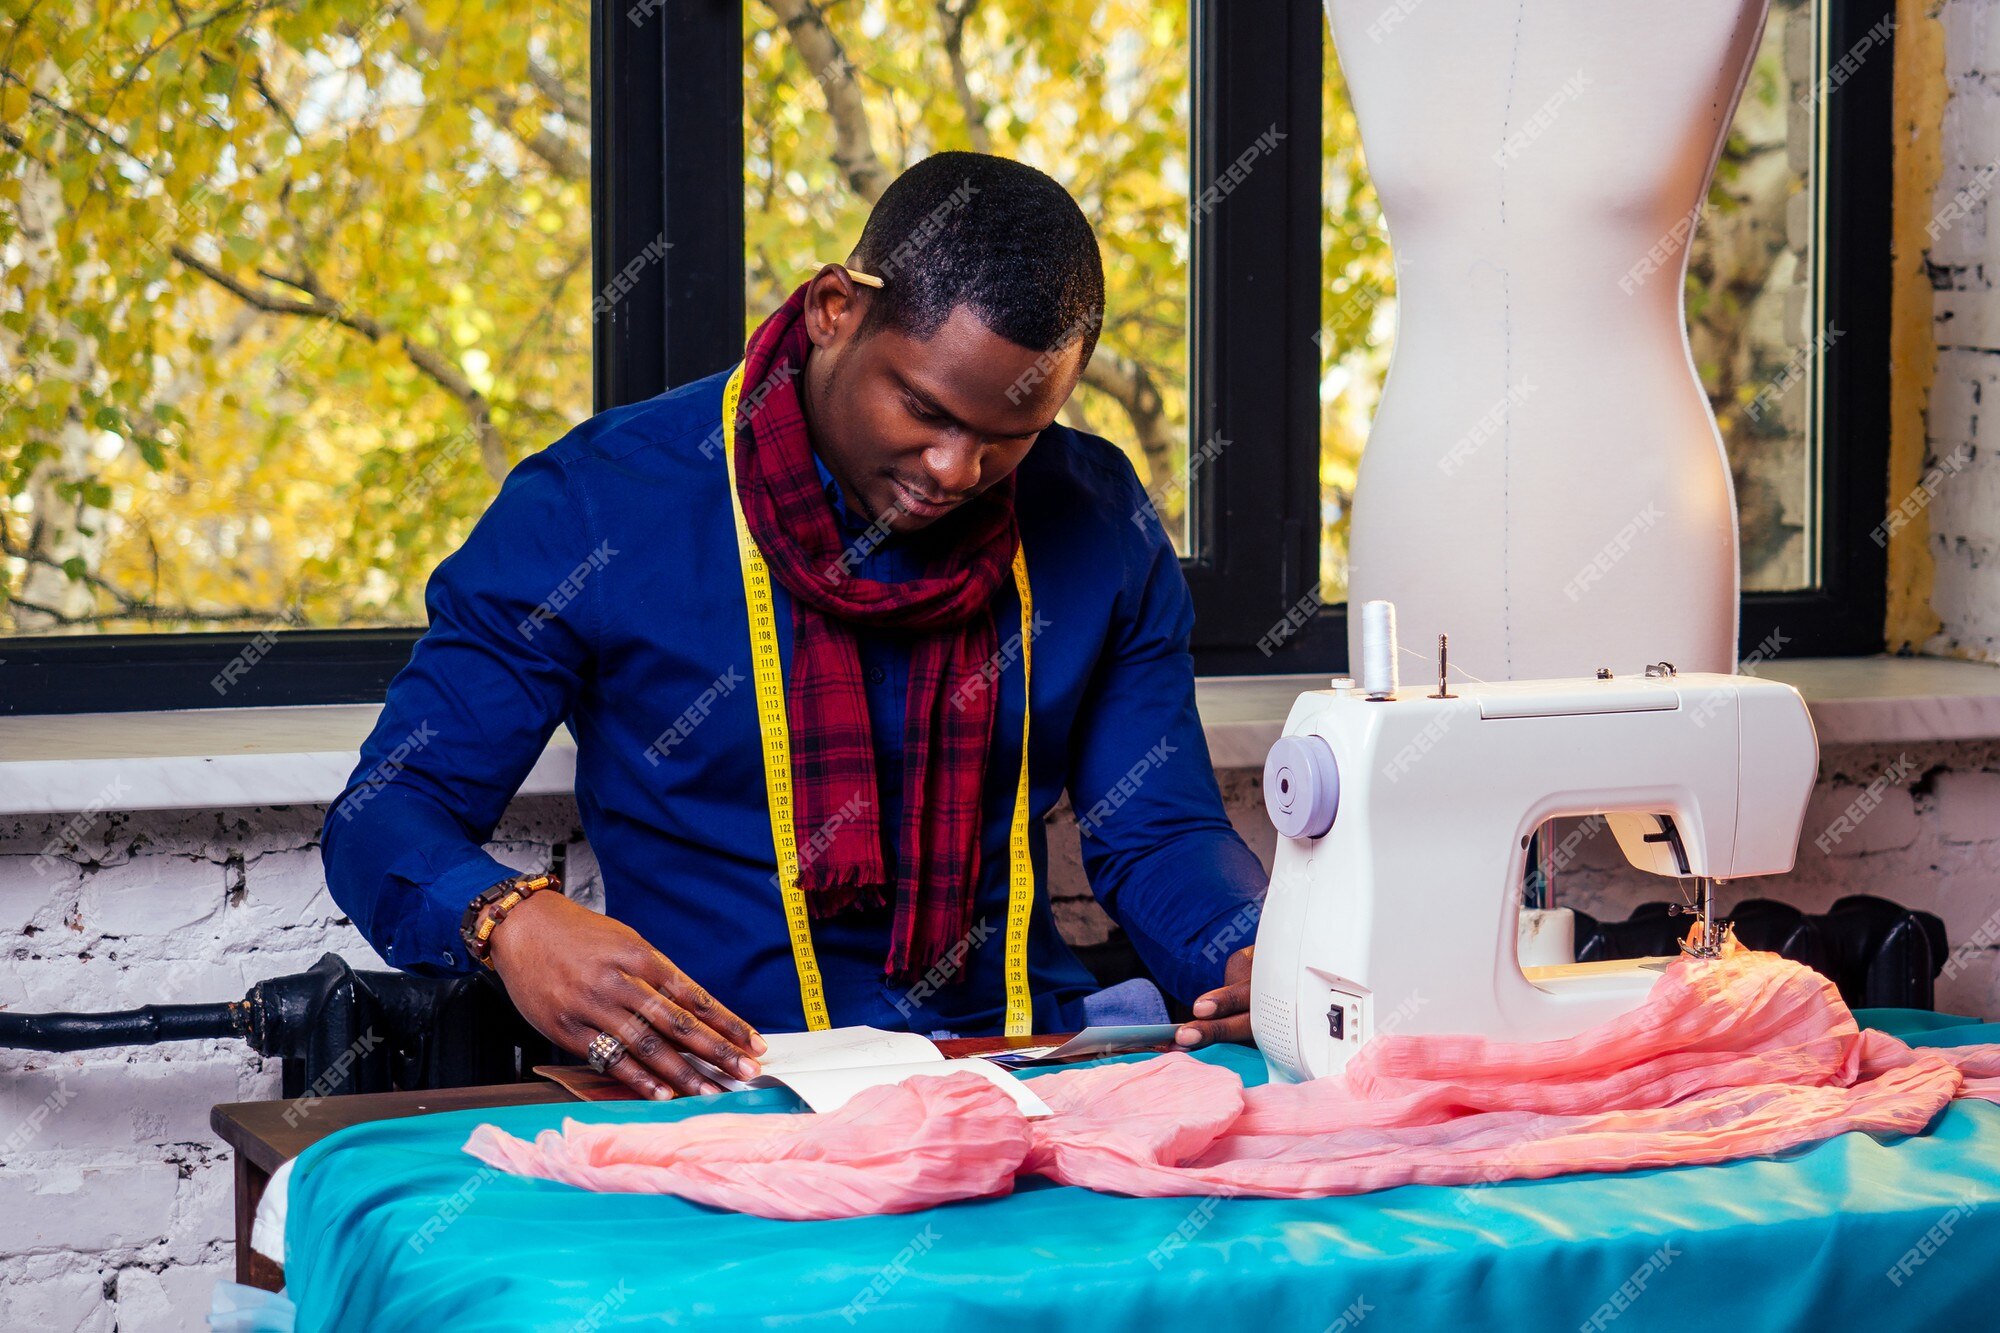 Premium Photo | Portrait of a handsome african man smiling seamstress with sewing   american man stylish designer working in tailor workshop  mannequin,table measuring tape in room against autumn window